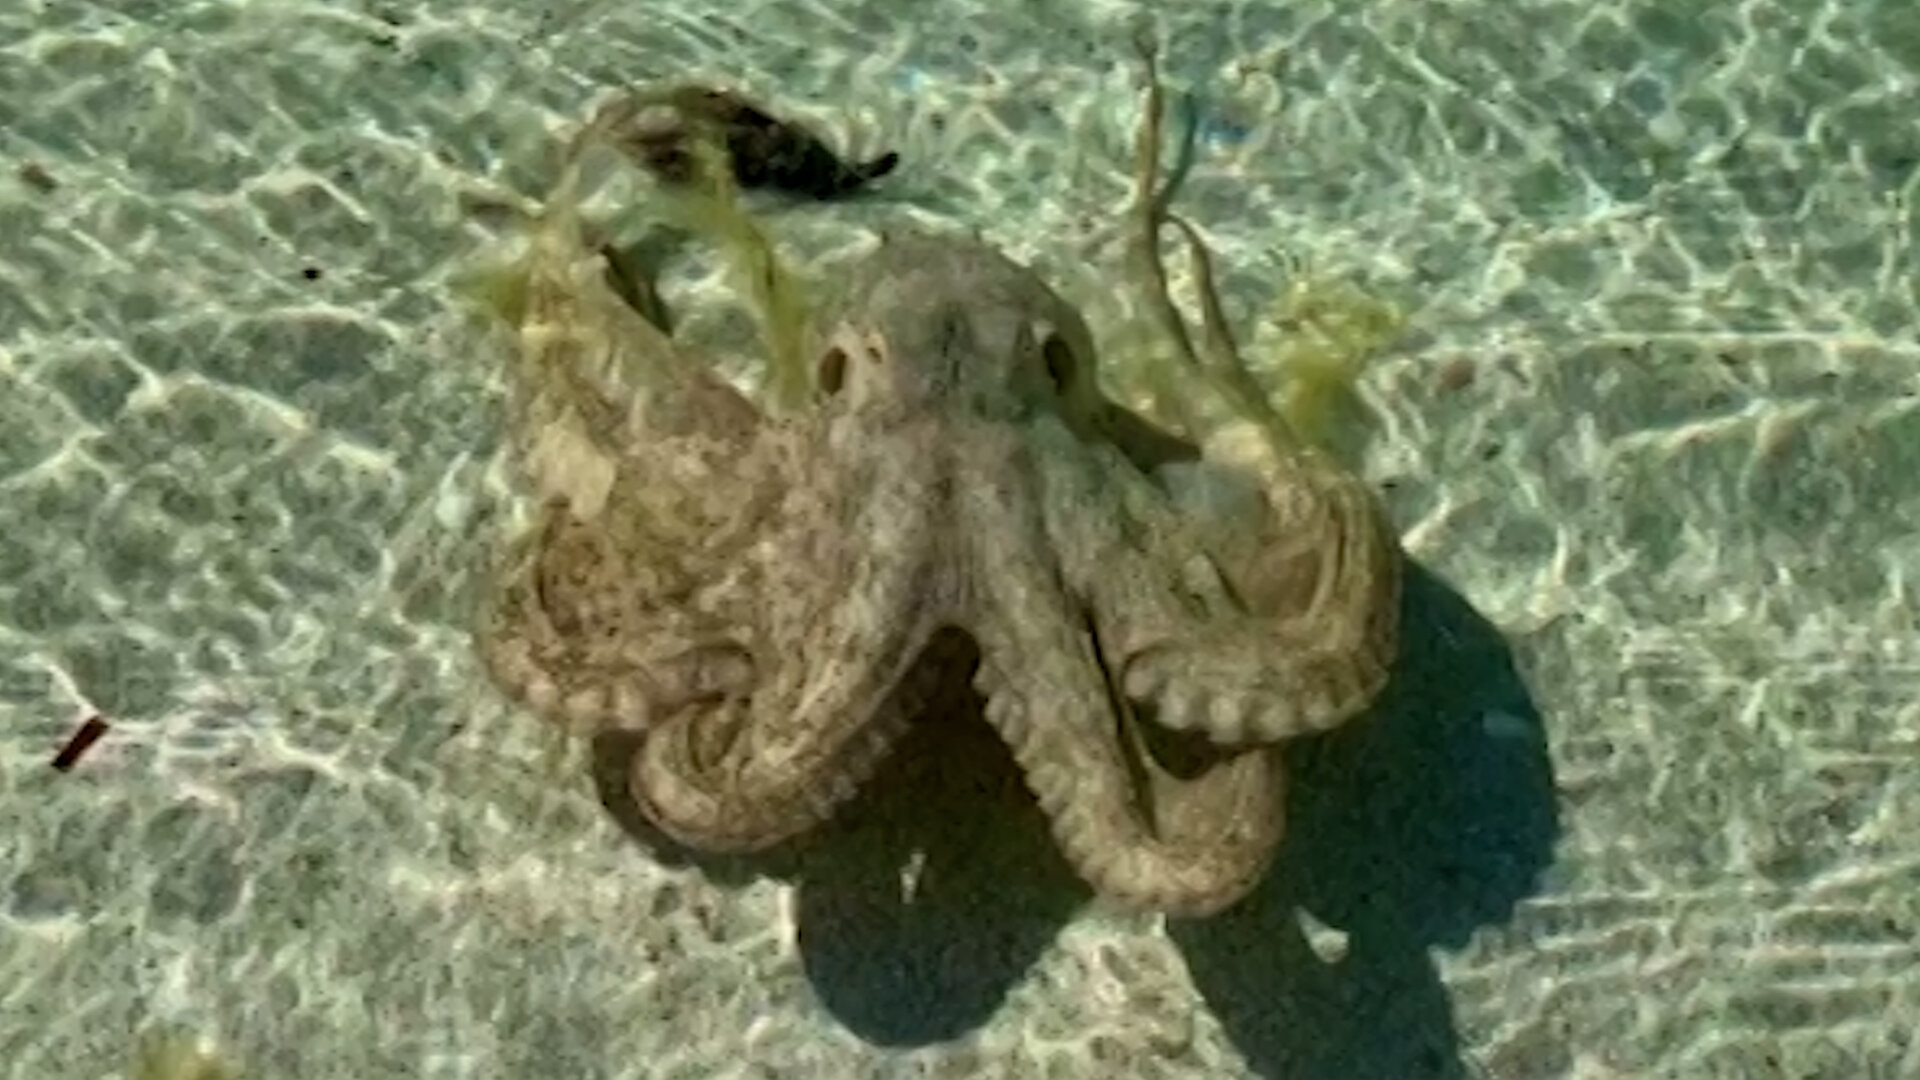 Detail Images Of An Octopus Nomer 49